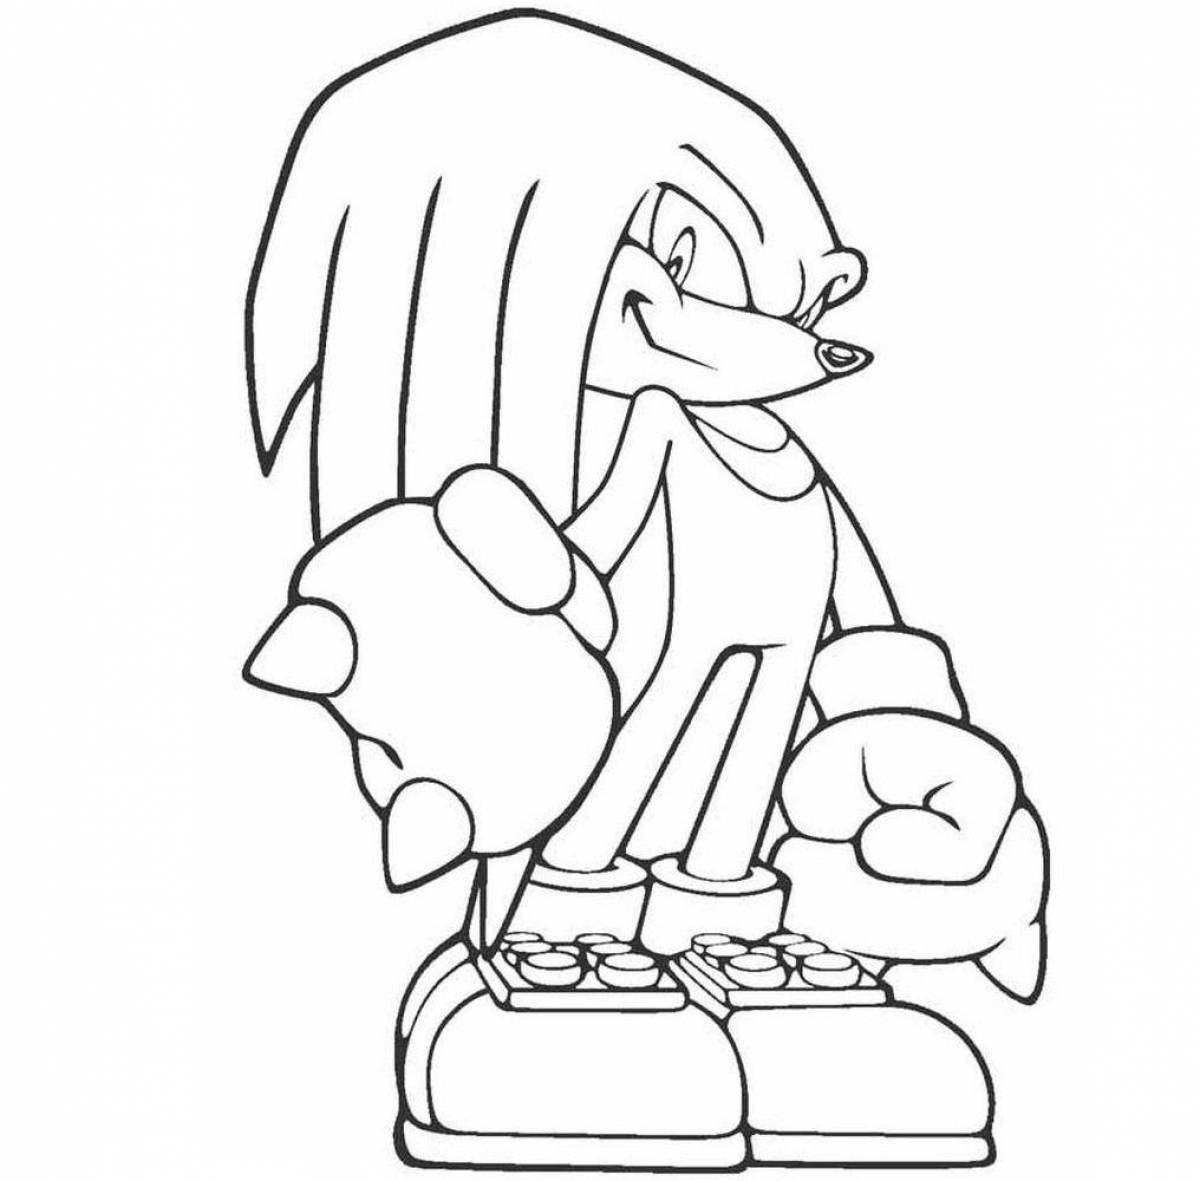 Colorful knuckles coloring book